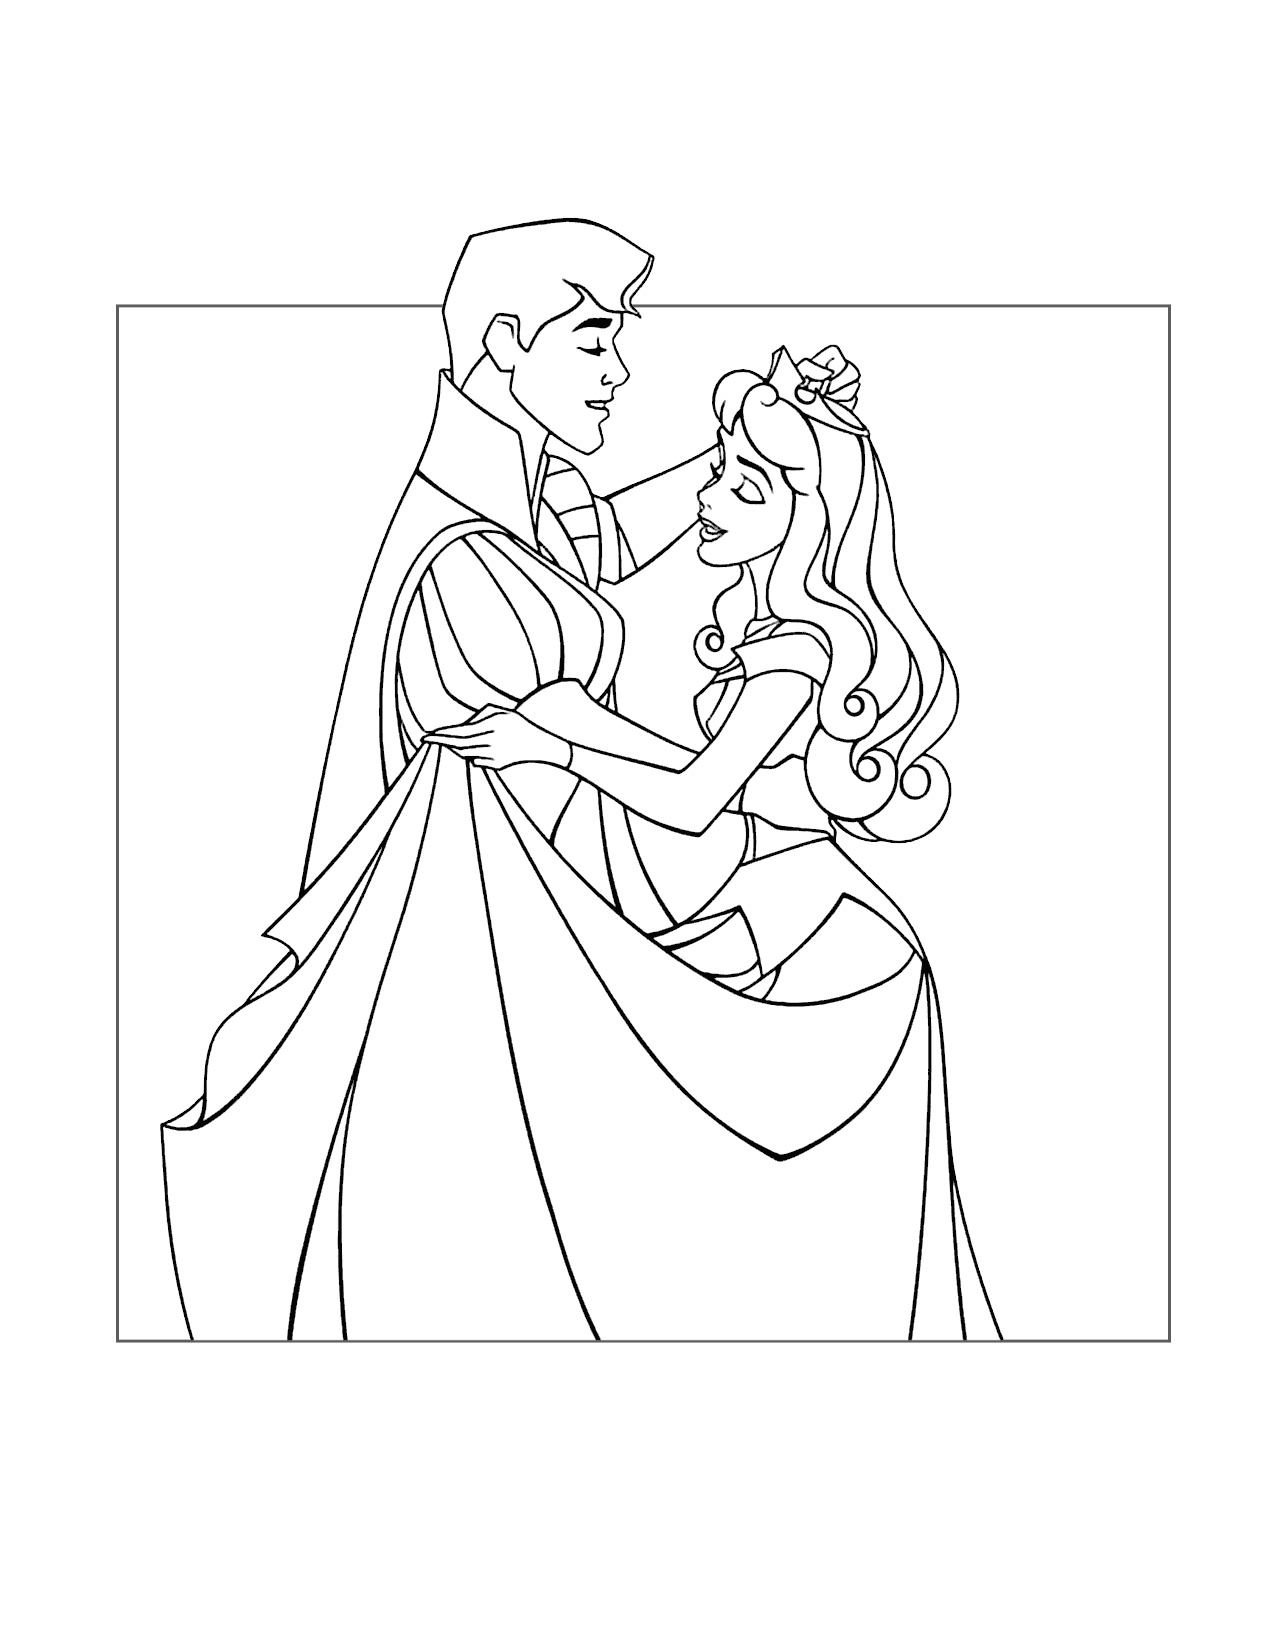 Prince Phillip And Princess Aurora Love To Dance Coloring Page